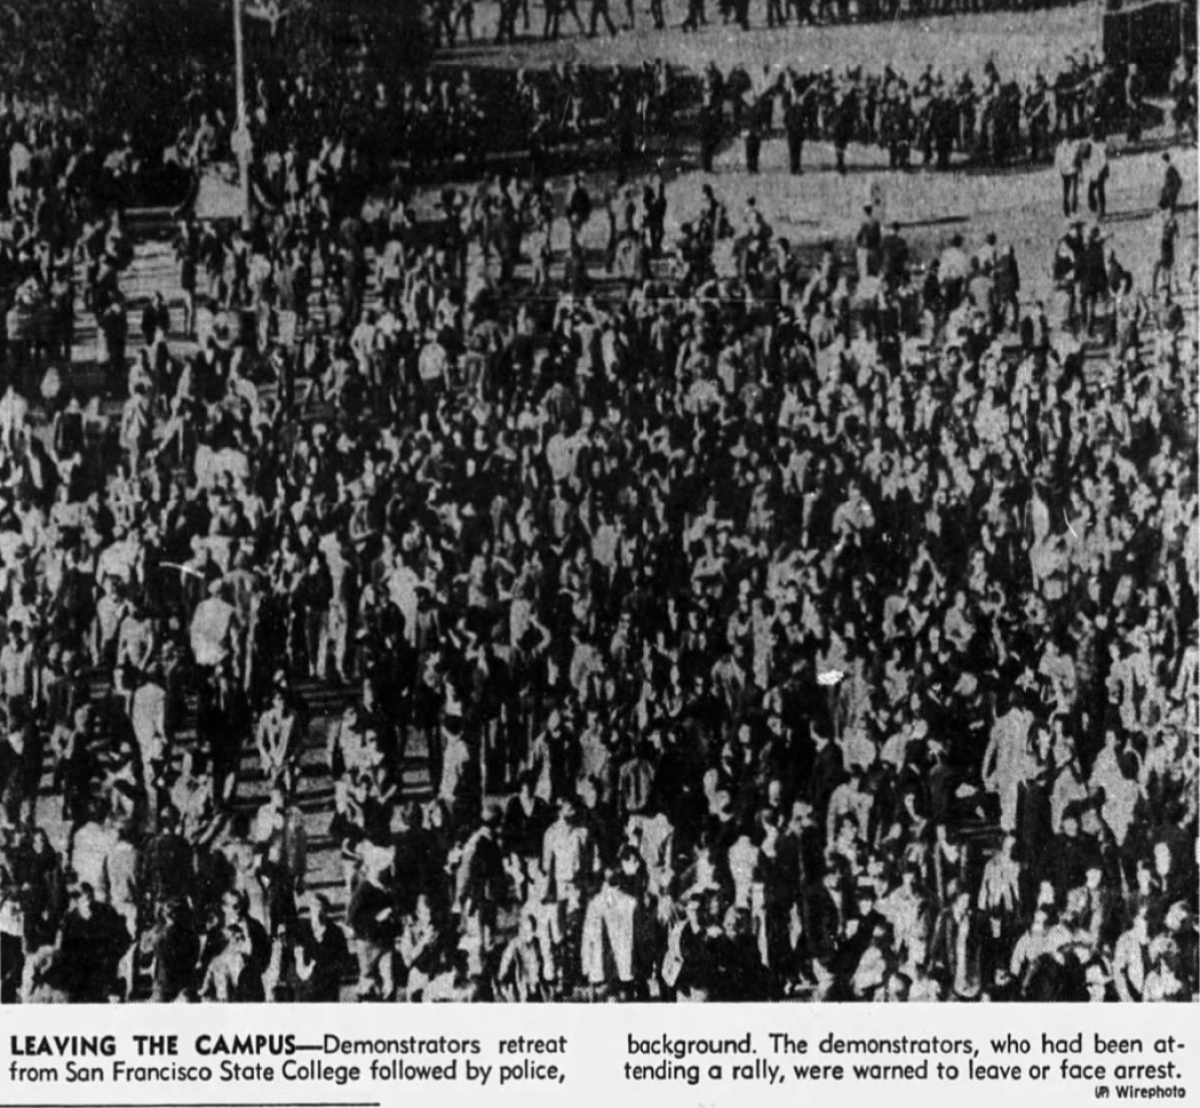 A newspaper clipping of a large crowd of protesters.